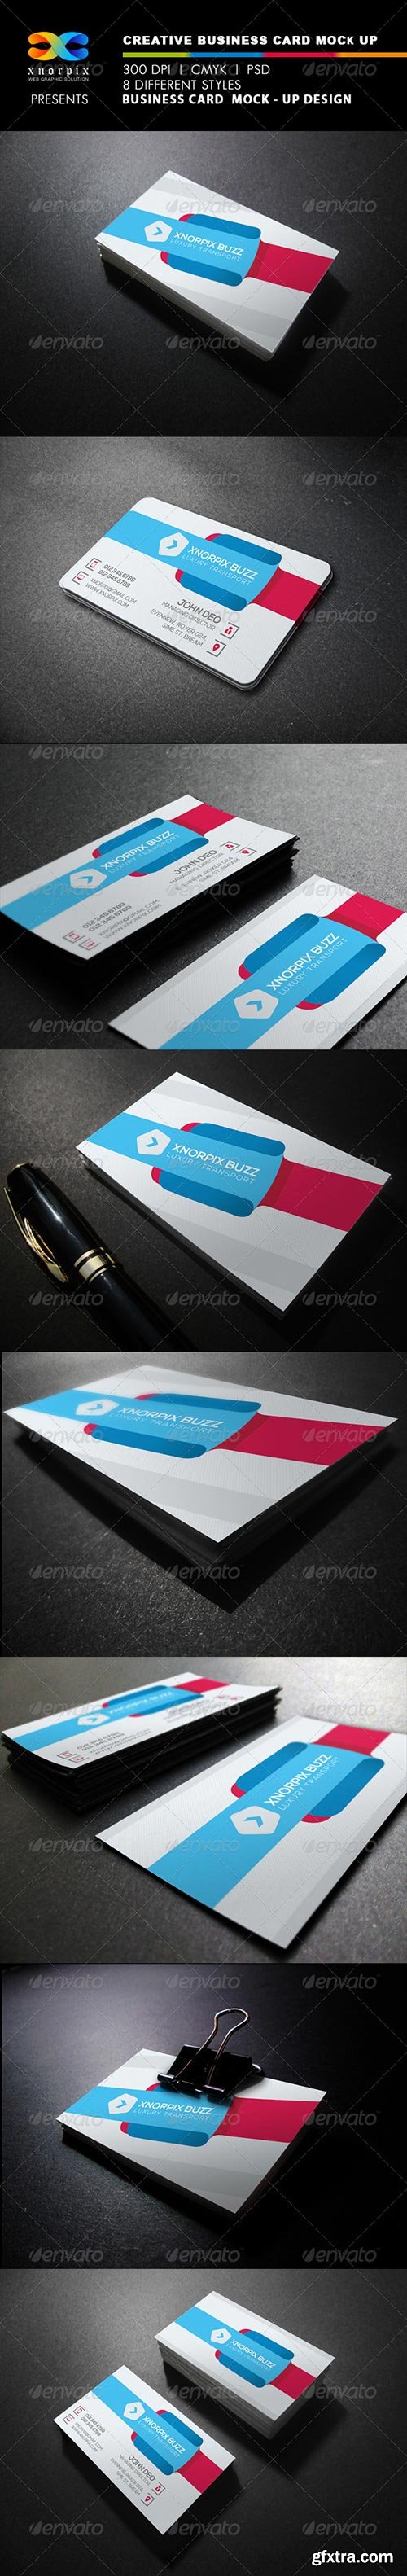 GraphicRiver - Realistic Business Card Mock up 7824989